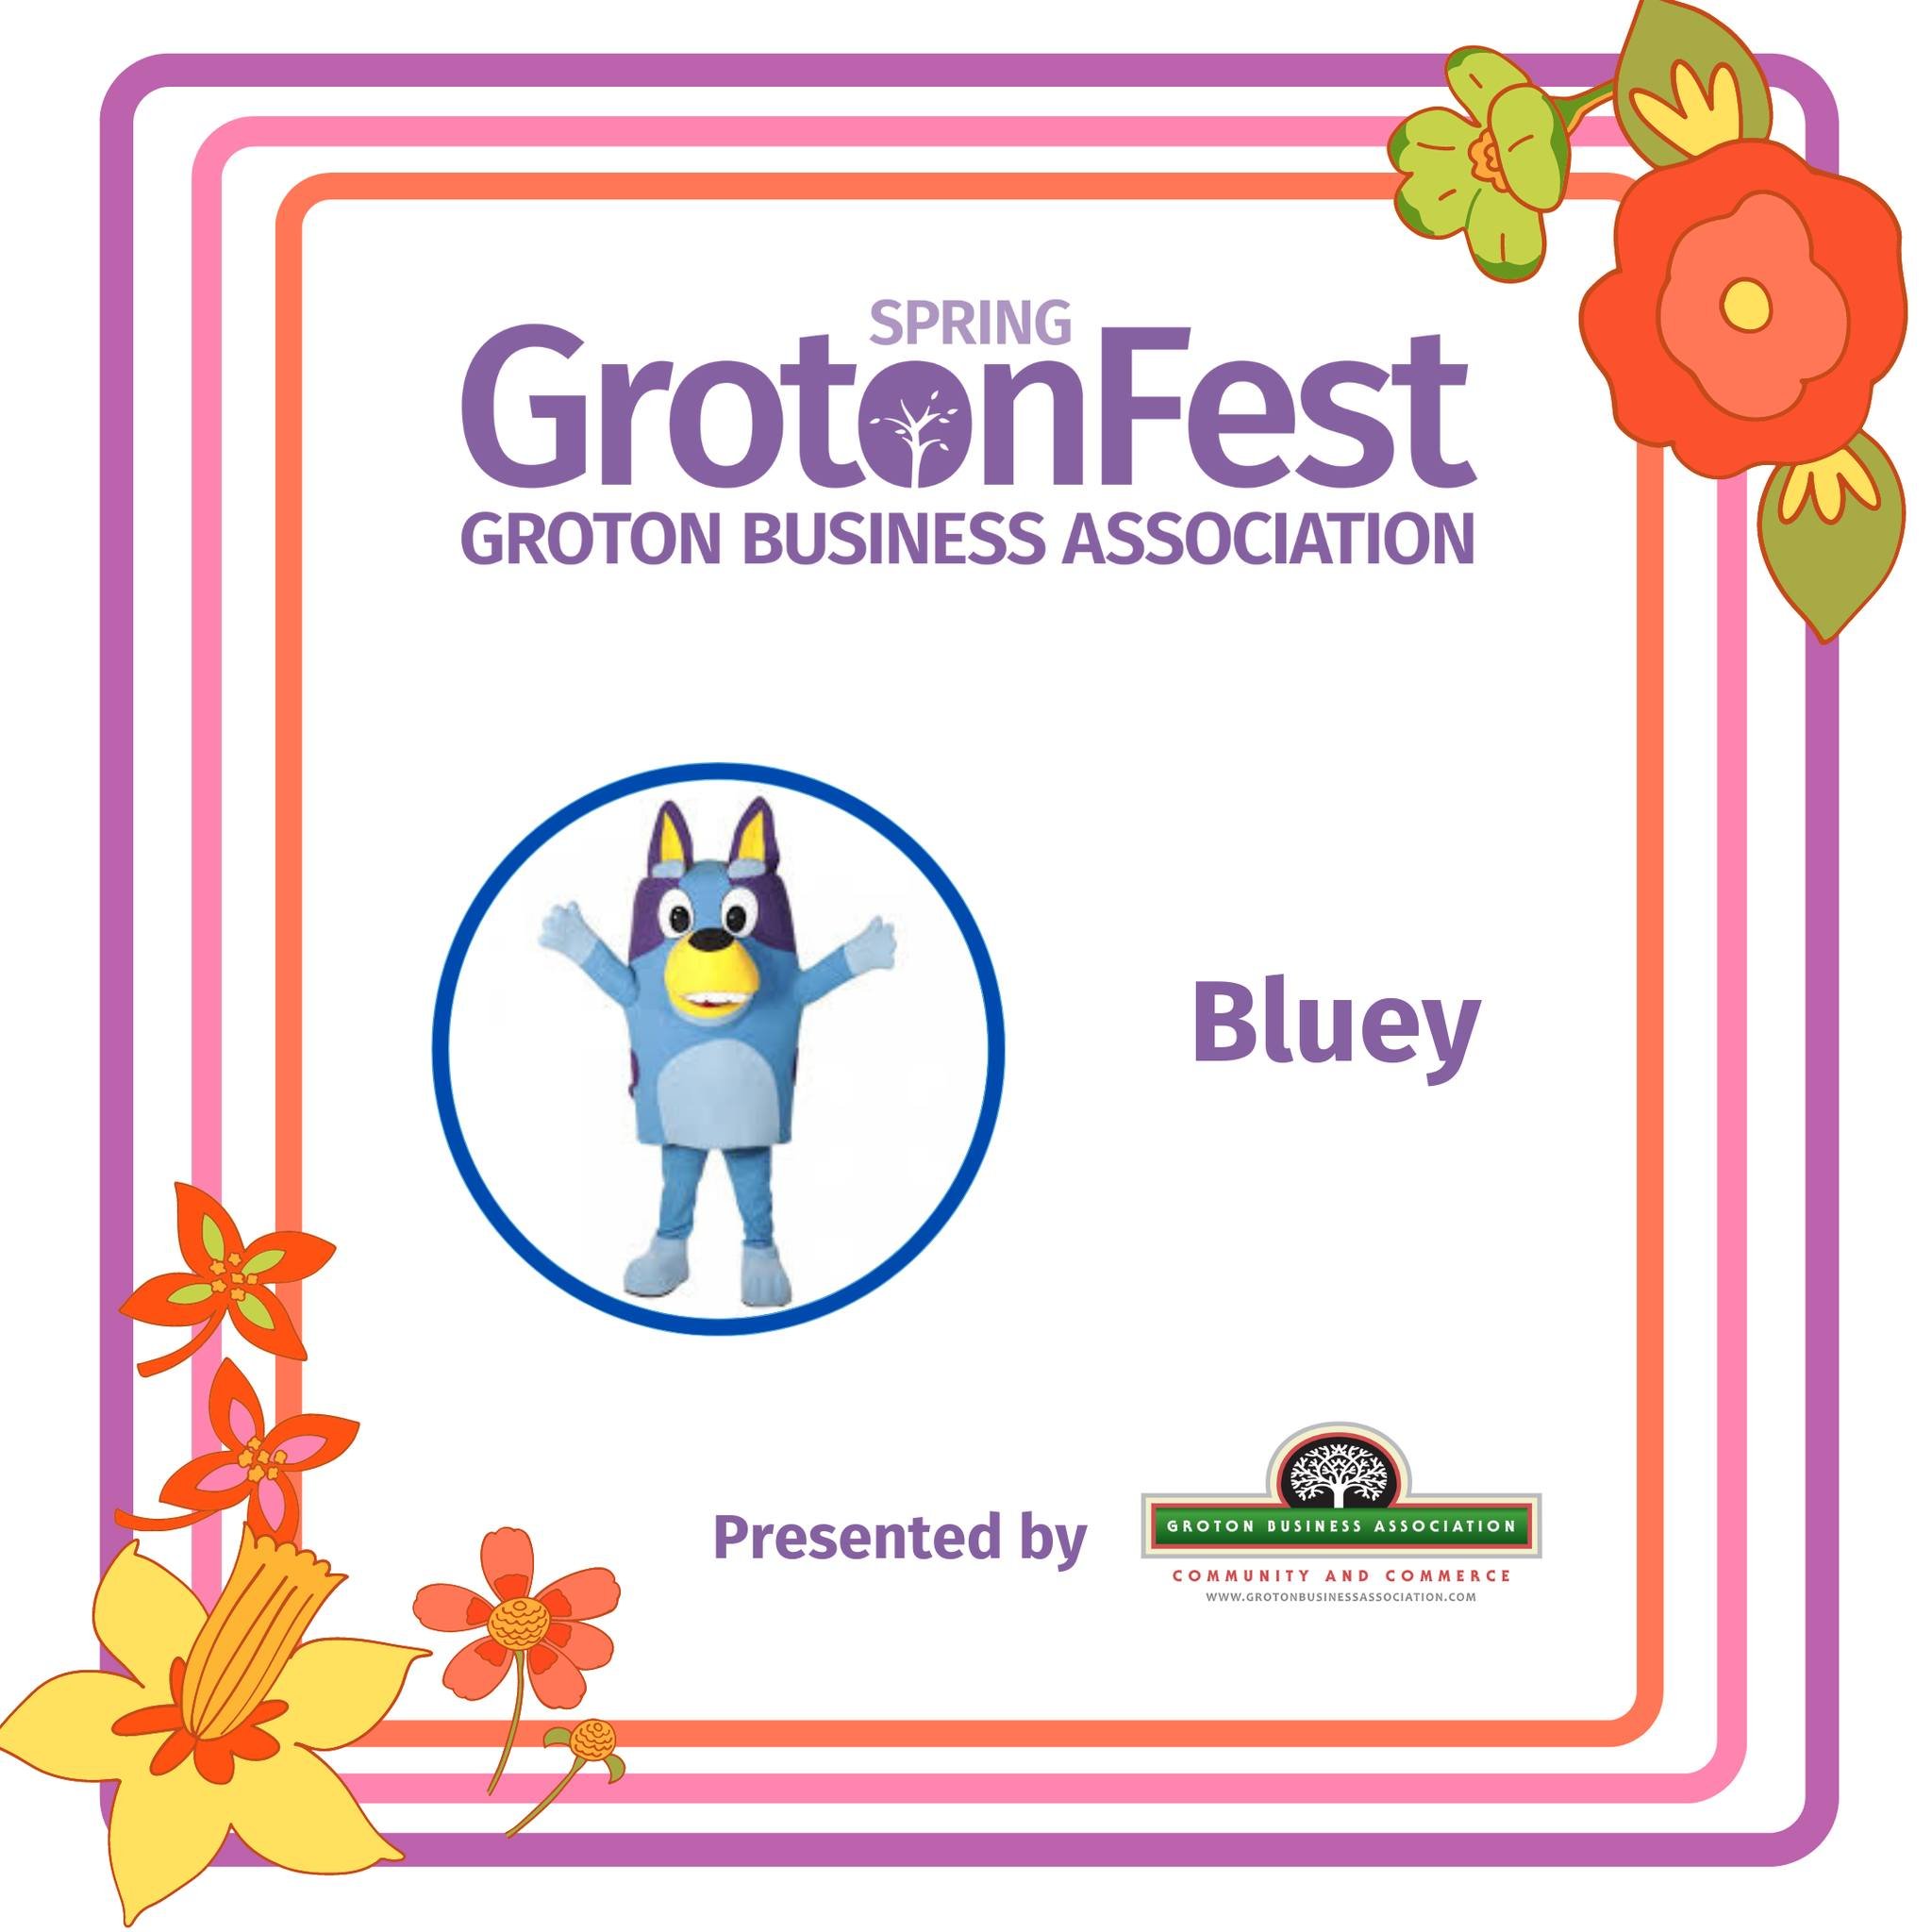 if you want to meet Bluey make sure you visit GrotonFest on May 19th from 1-3pm on the Prescott Back Lawn.